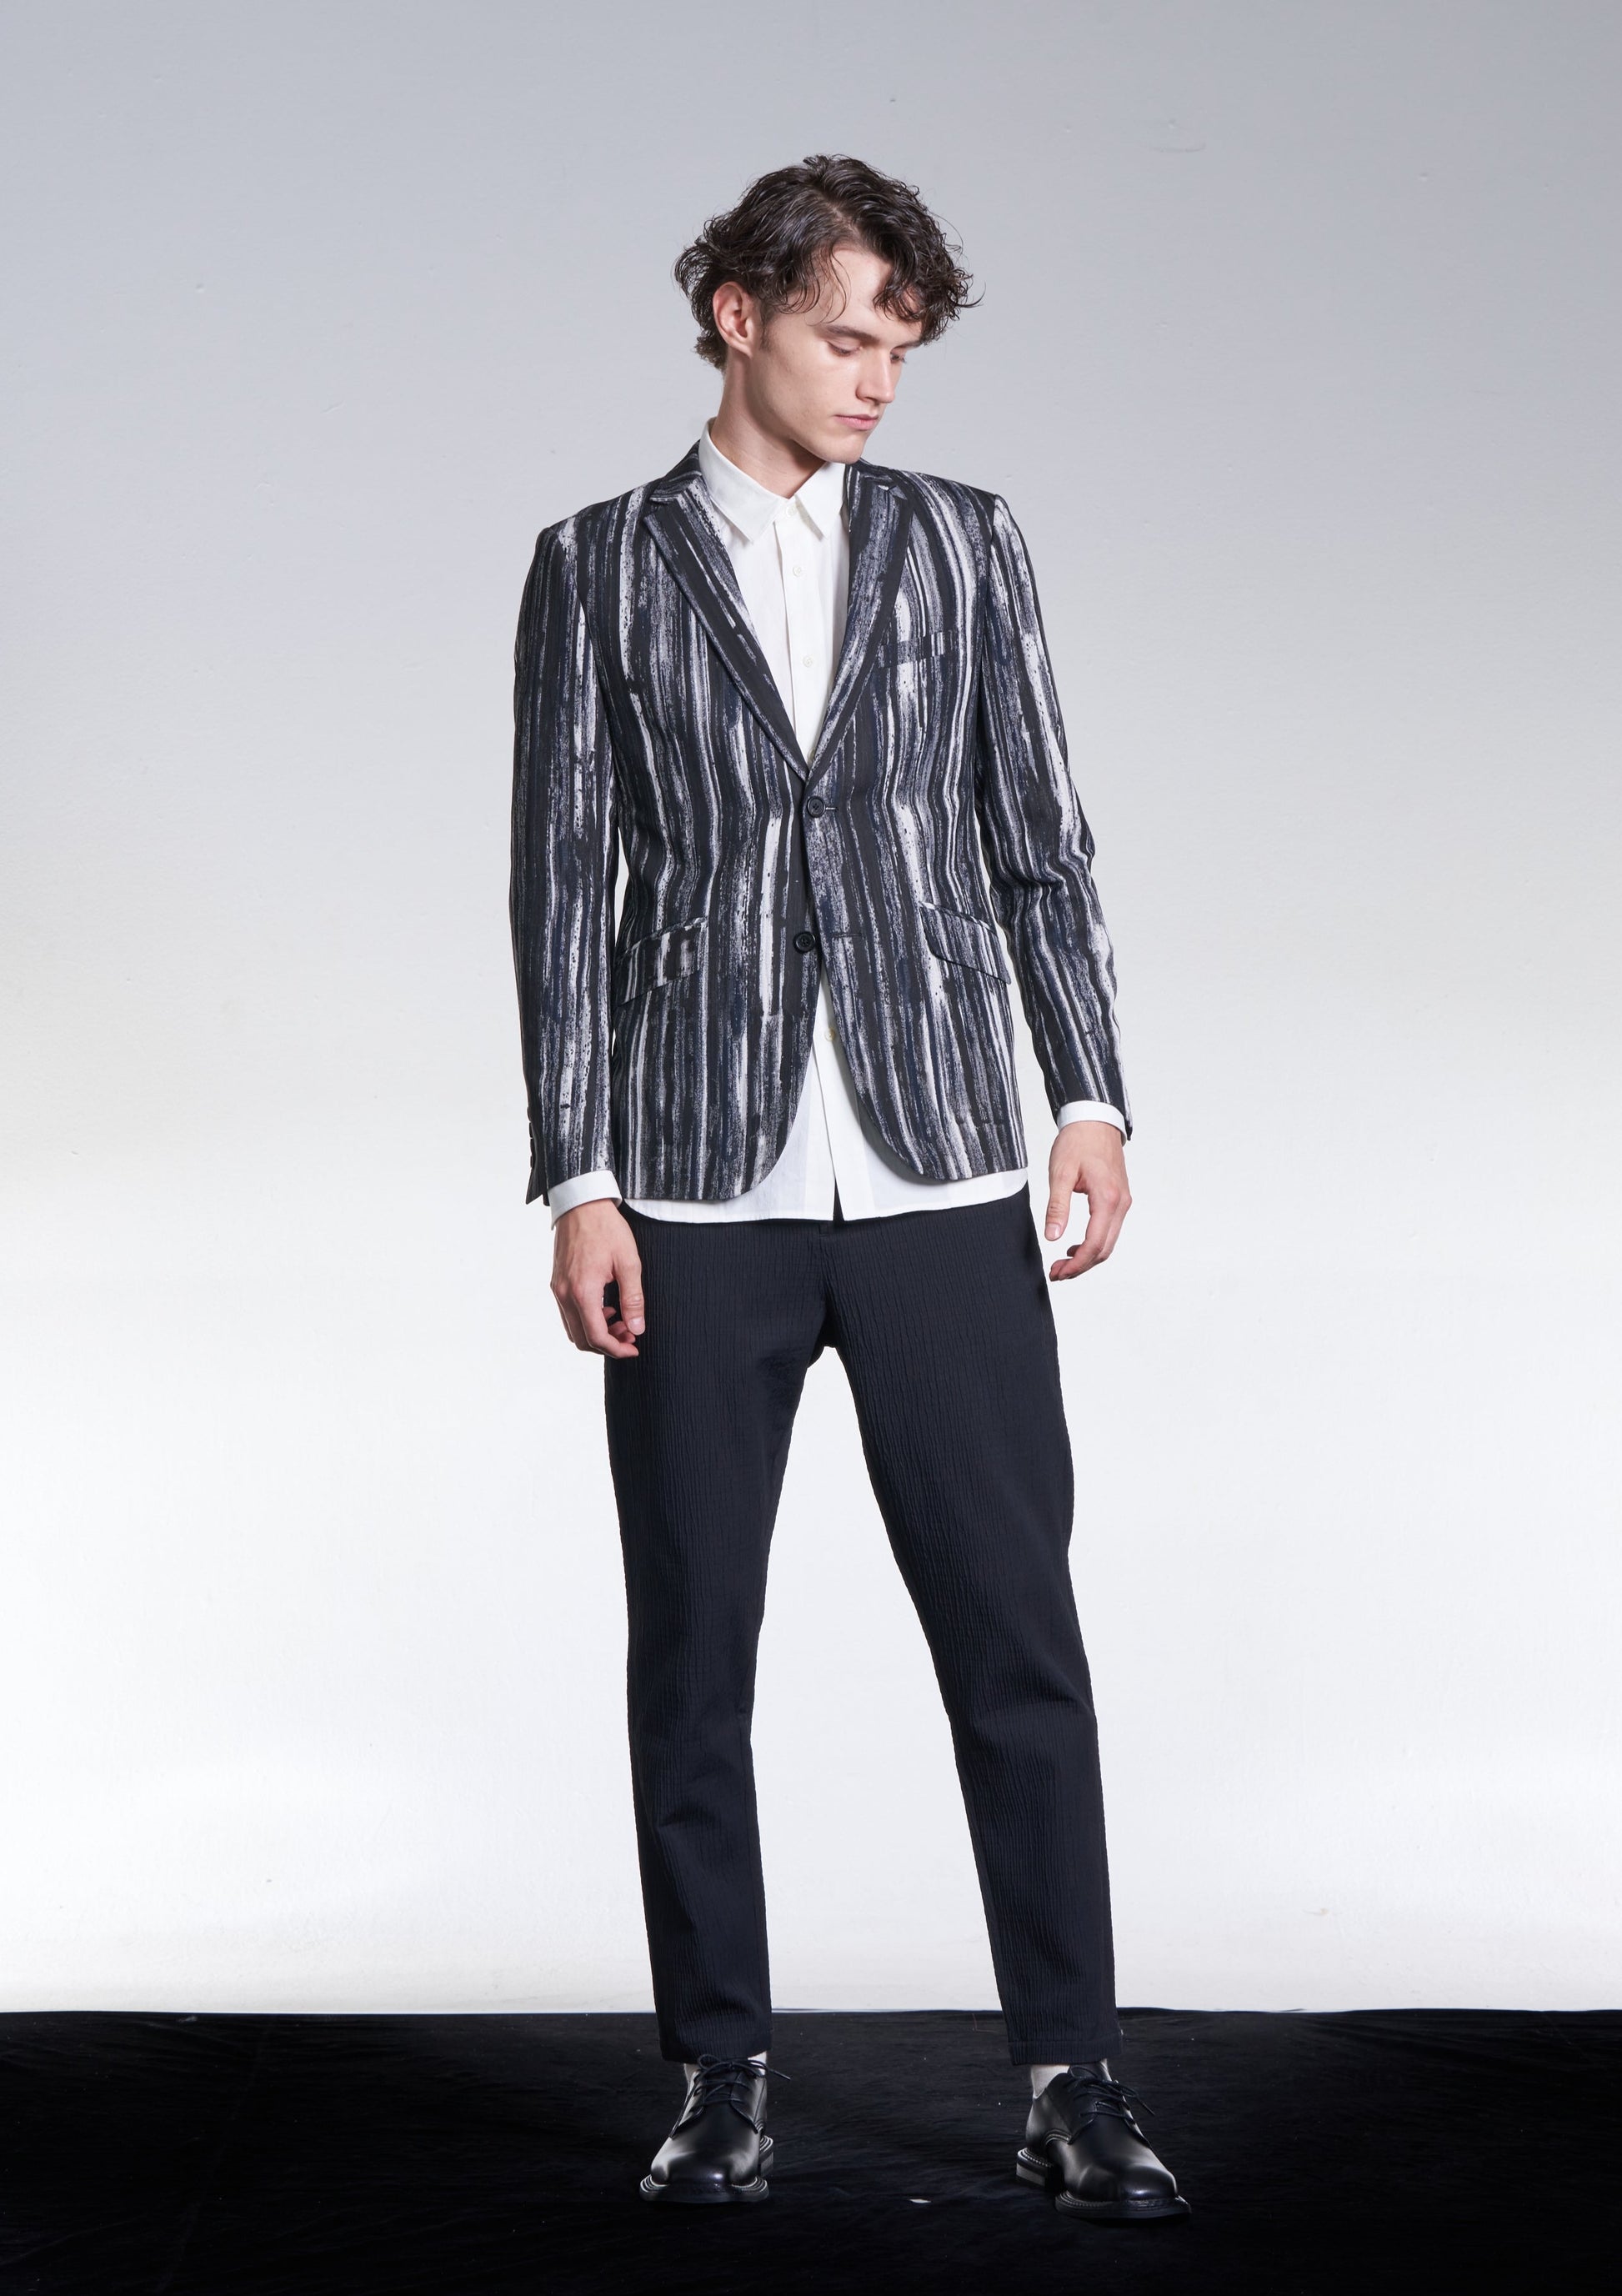 Striped Textured Fitted Pants – HARRISON WONG